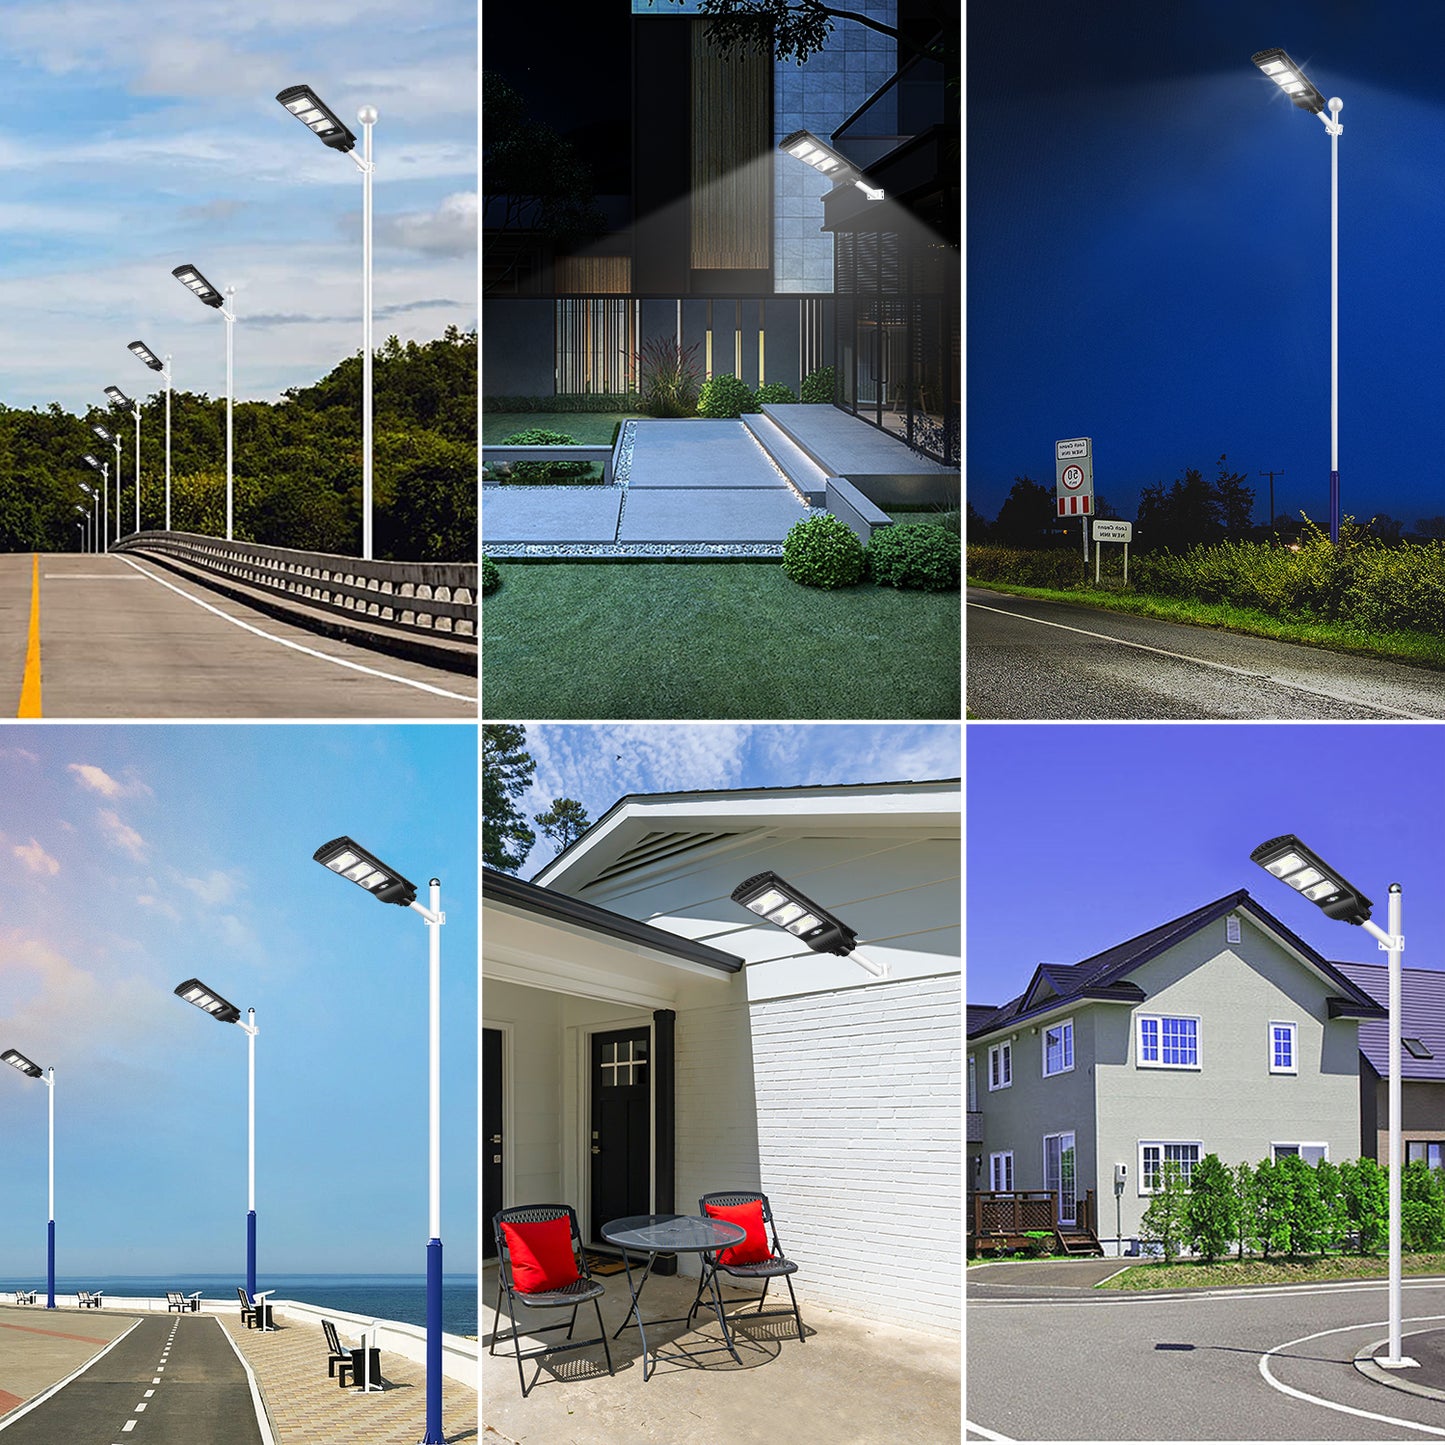 Commercial Solar Street Light Motion Sensor, 120000LM Waterproof Solar Security Flood Lights Outdoor, Dusk to Dawn Solar LED Lights Lamp with Remote Control for Garden, Yard, Path, Parking Lot